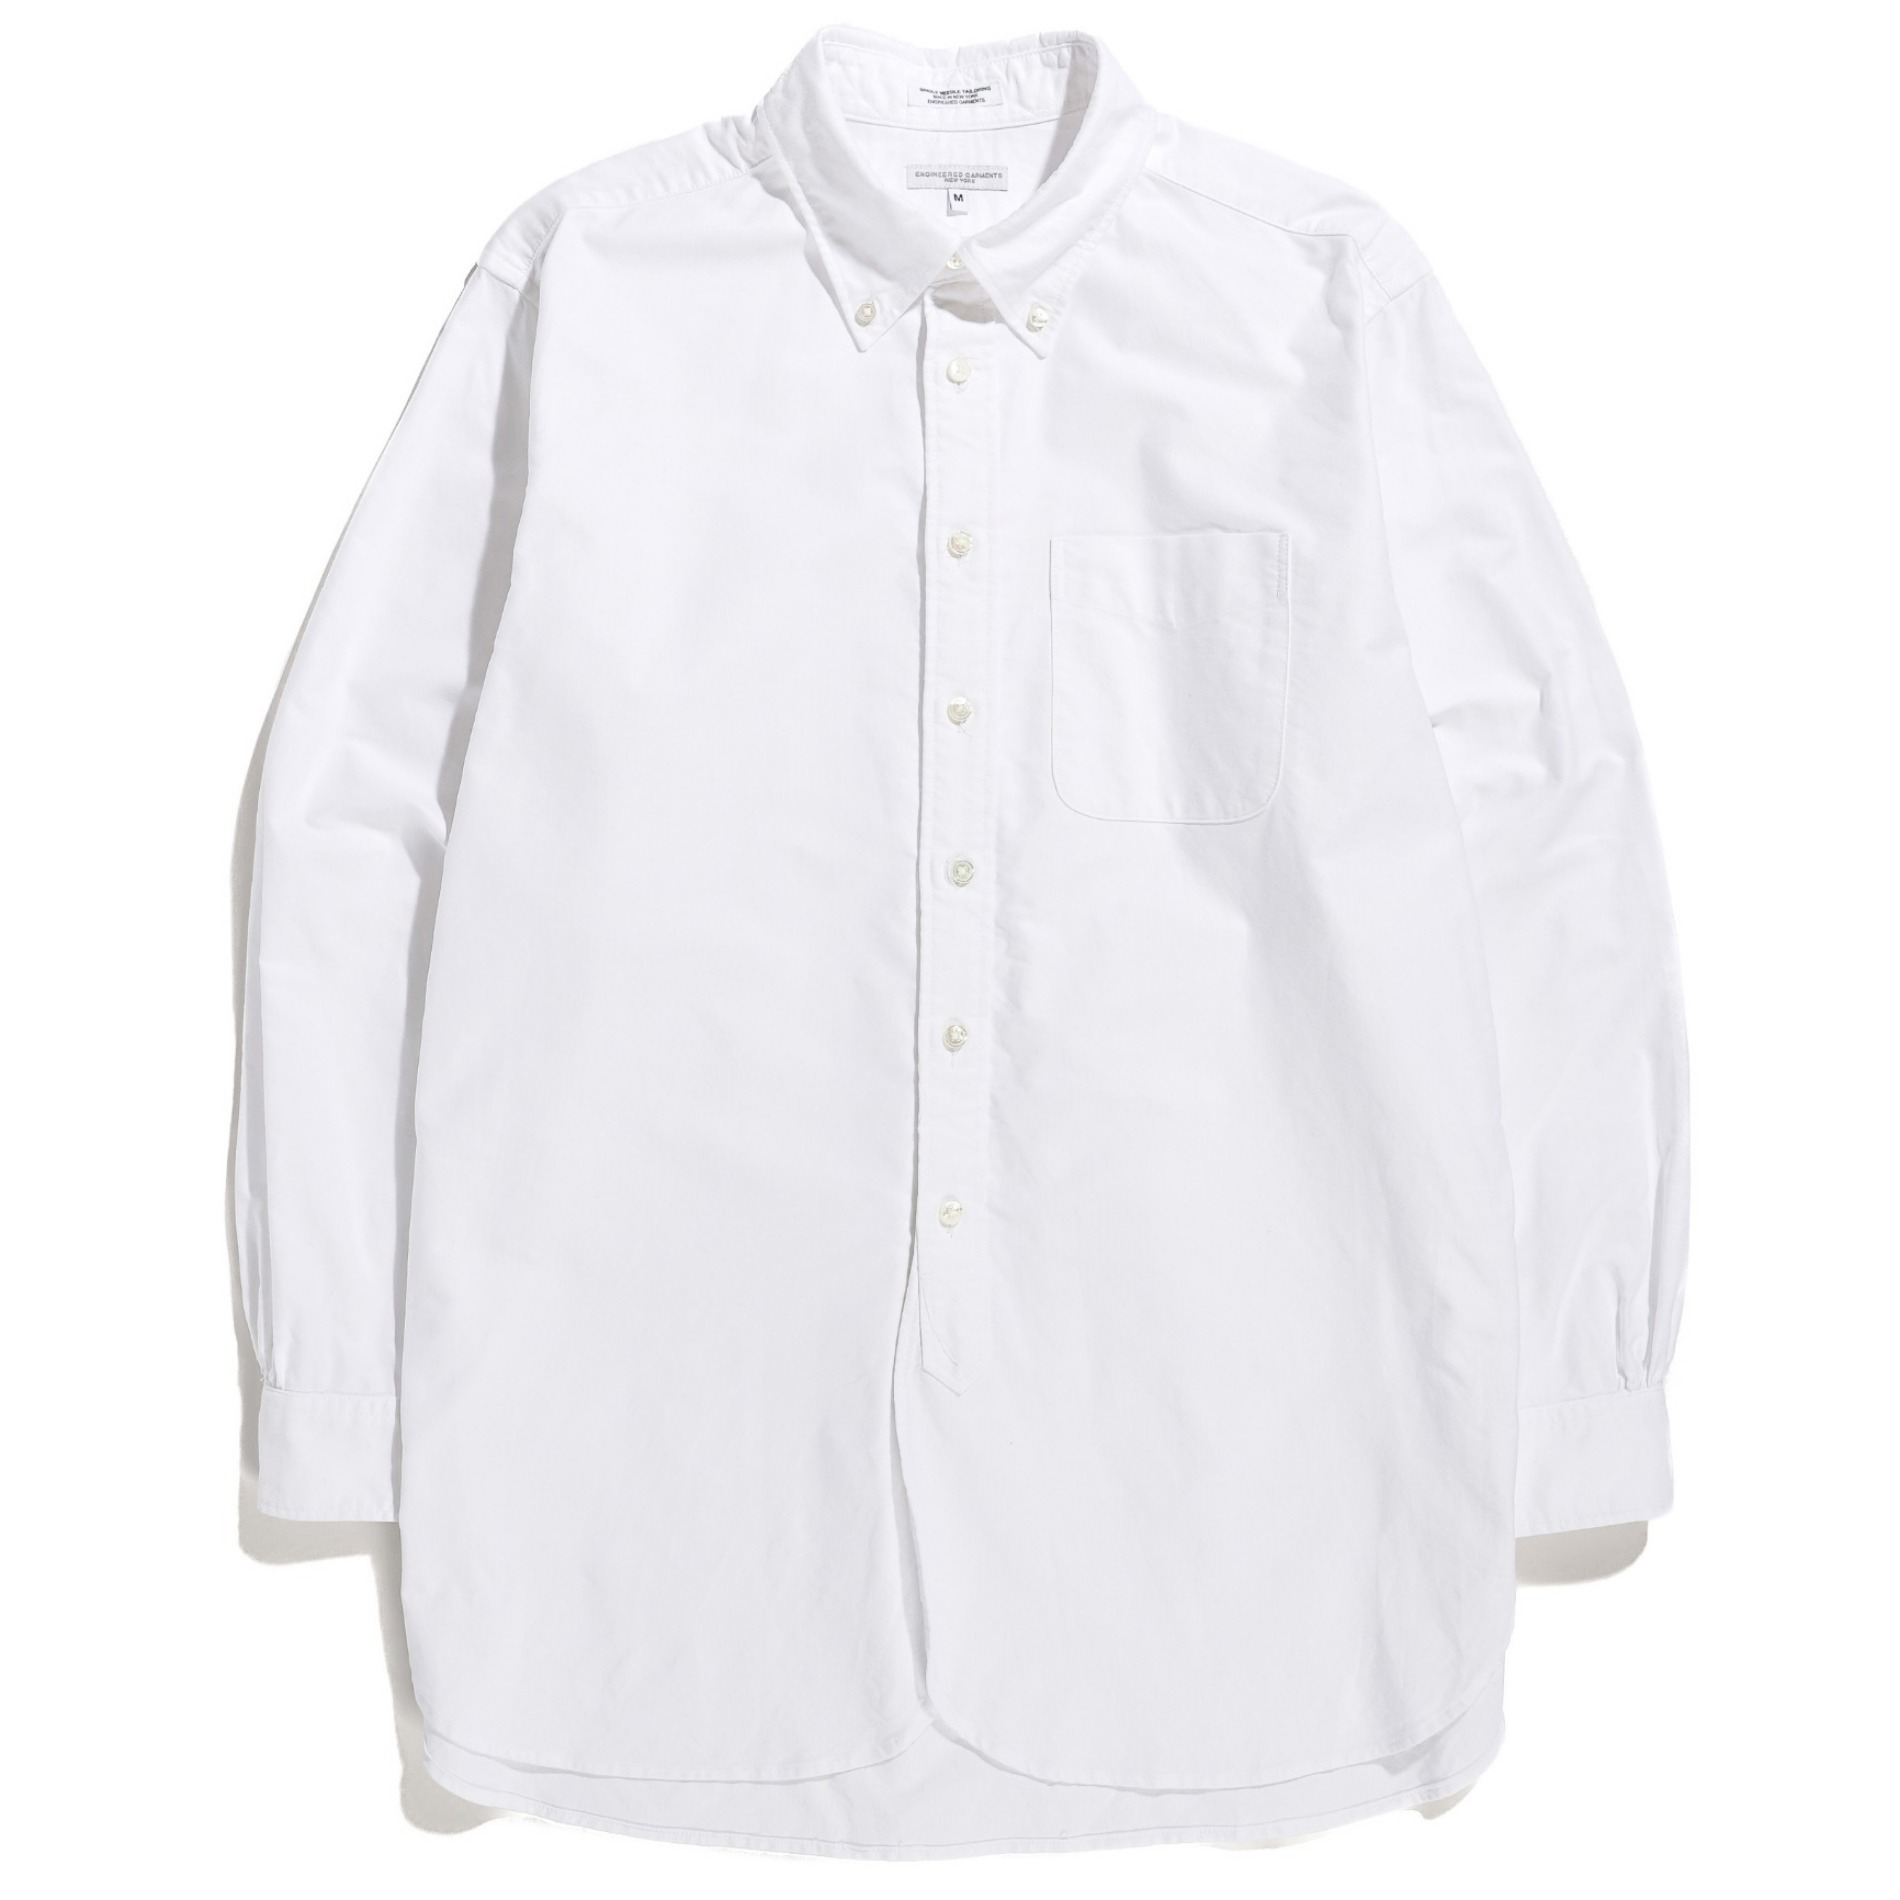 SS23 ENGINEERED GARMENTS 19 CENTURY BD SHIRT WHITE 100S 2PLY BROADCLOTH